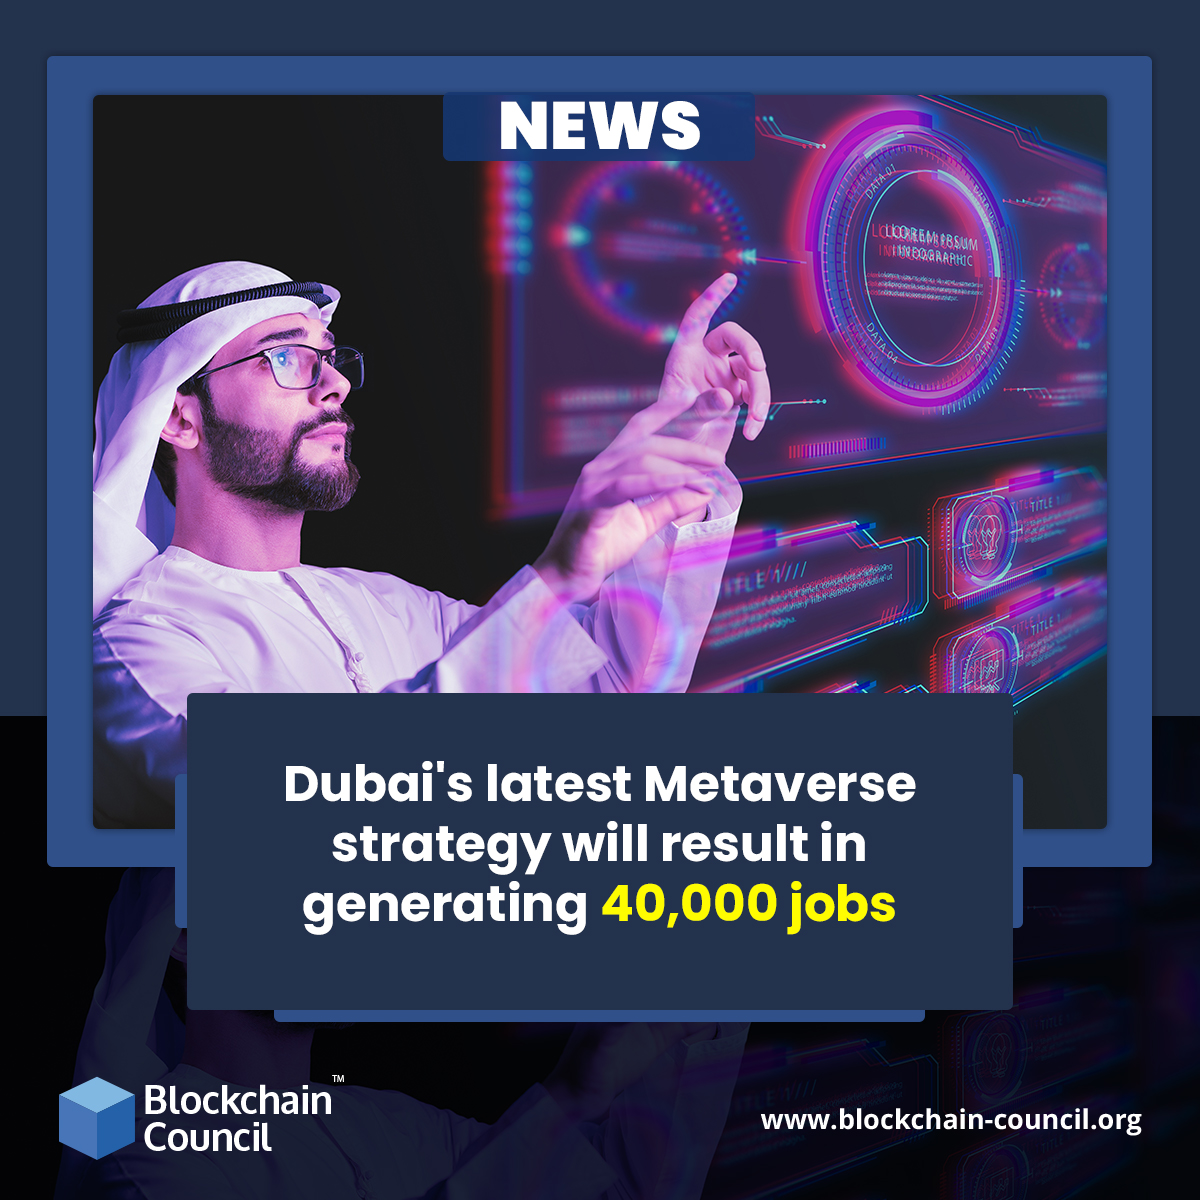 Dubai's latest Metaverse strategy will result in generating 40,000 jobs